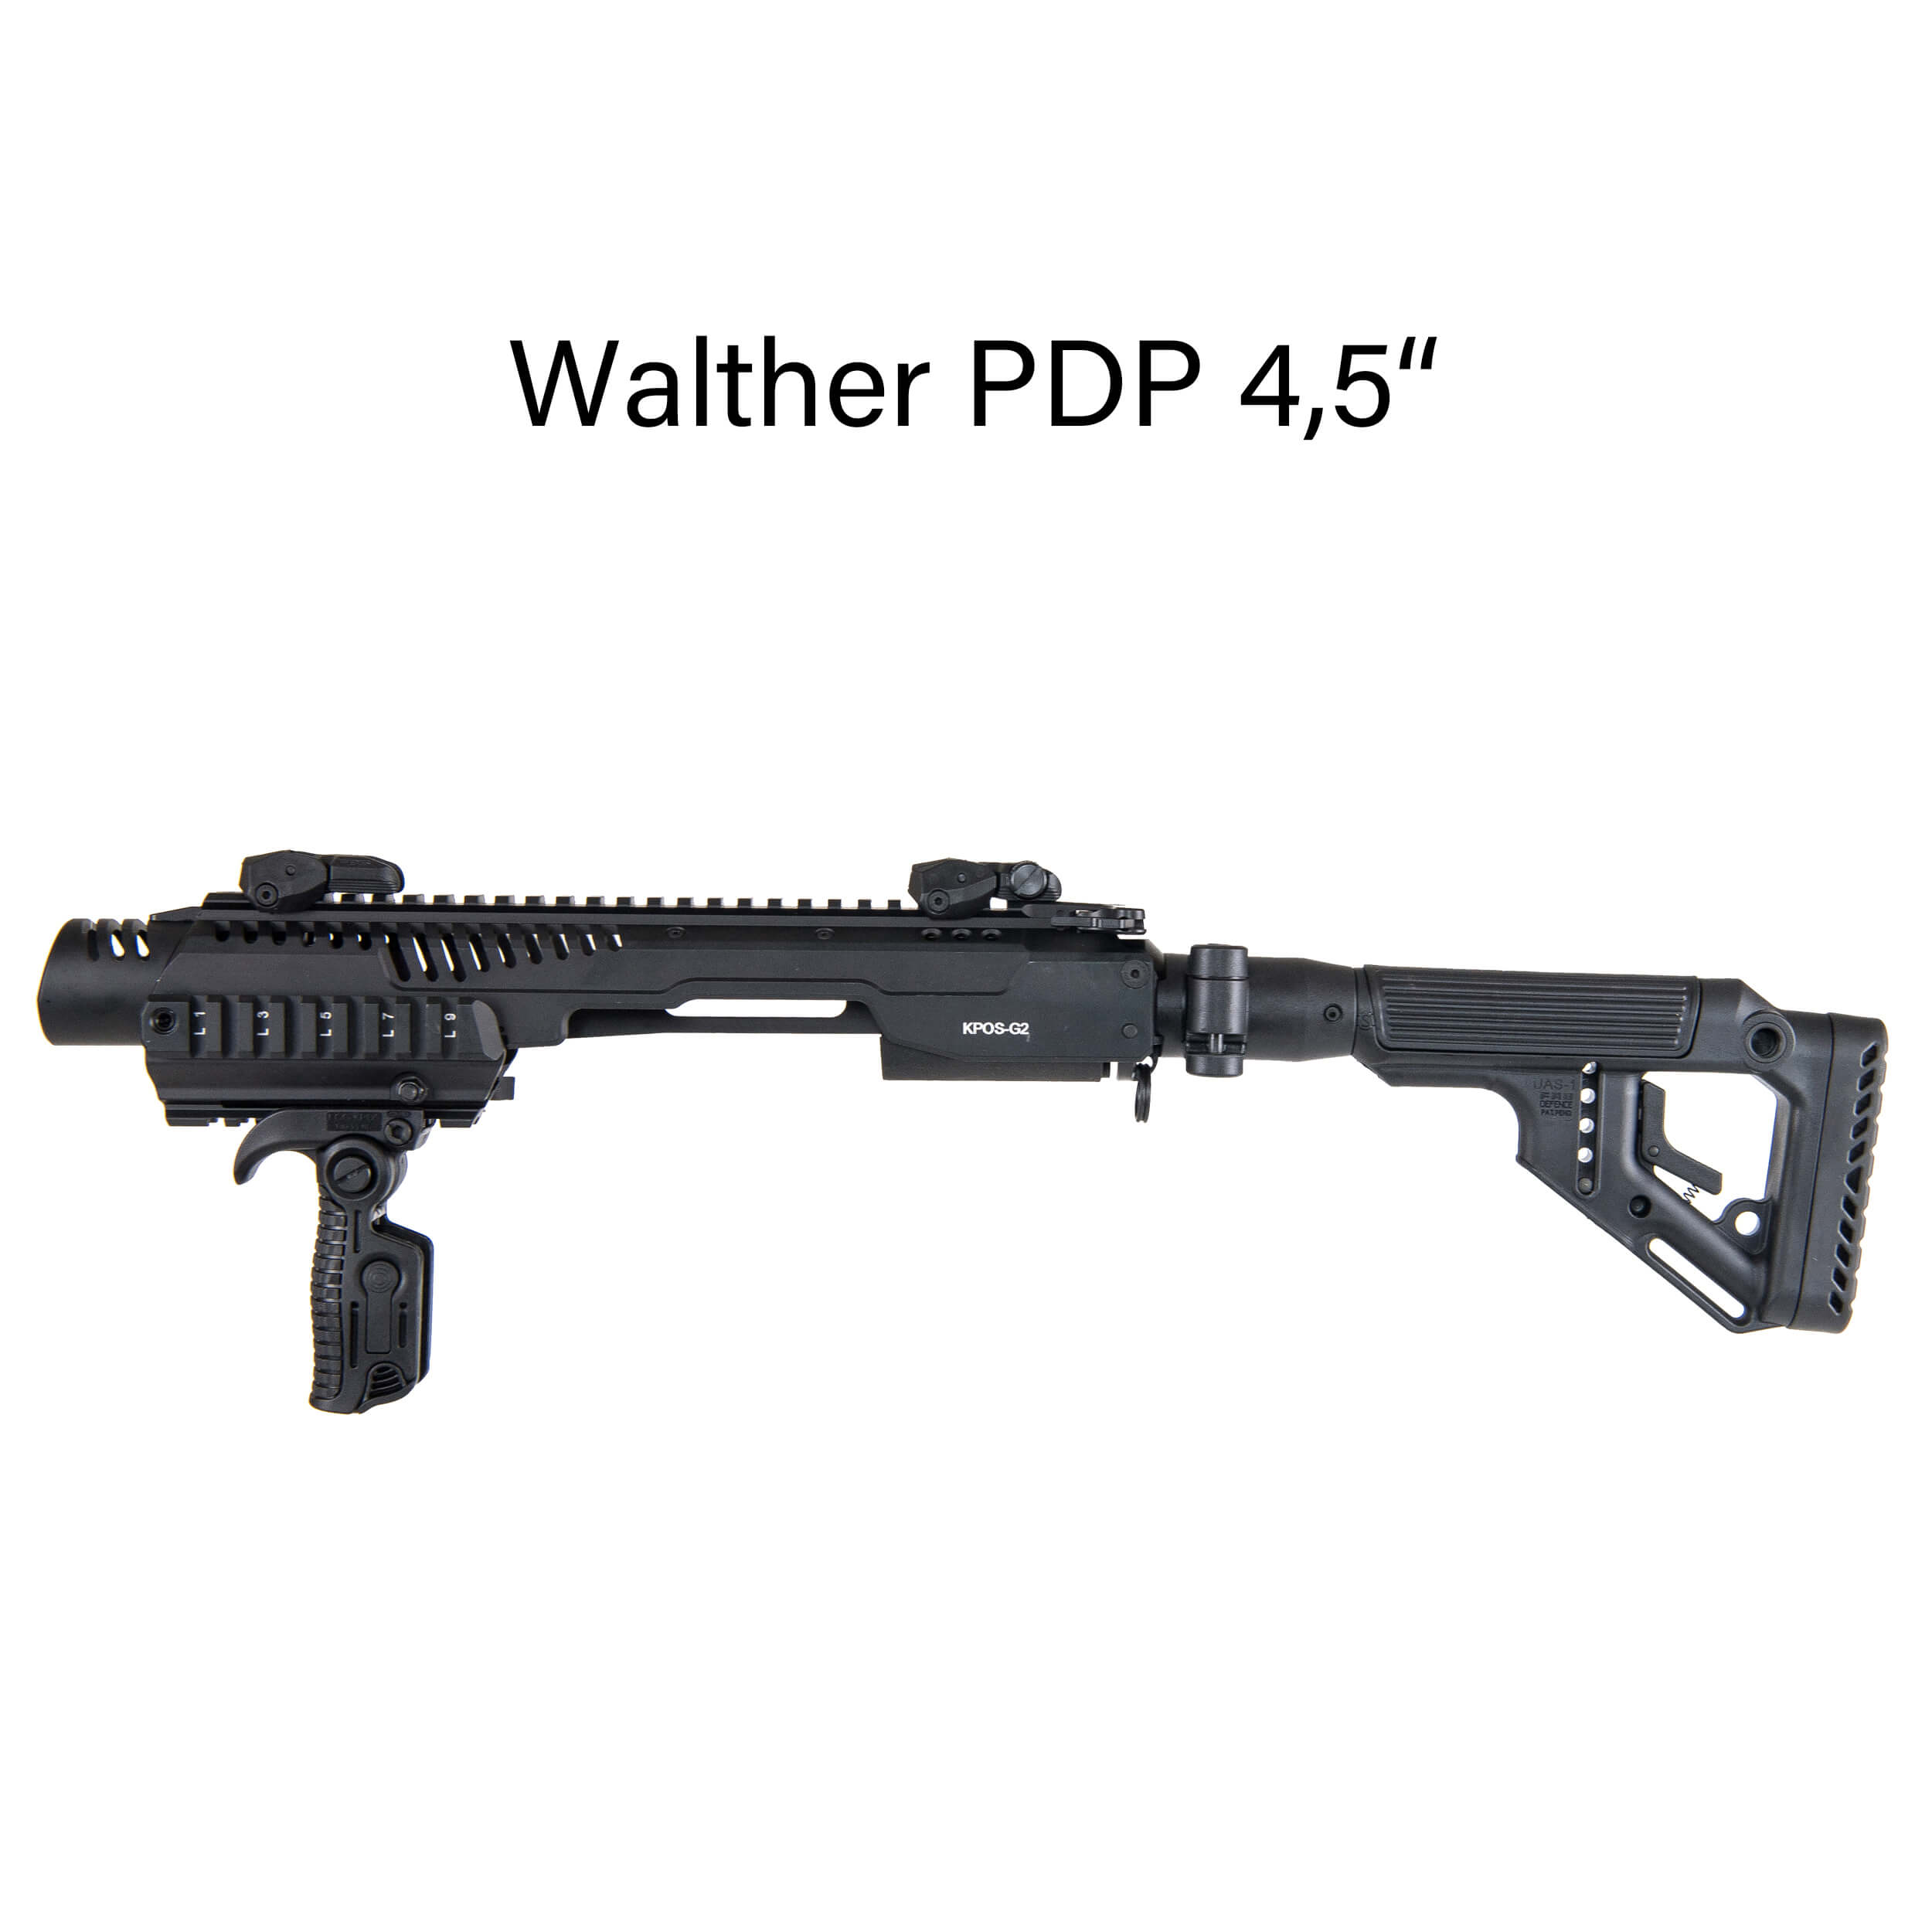 KPOS G2D Walther PDP